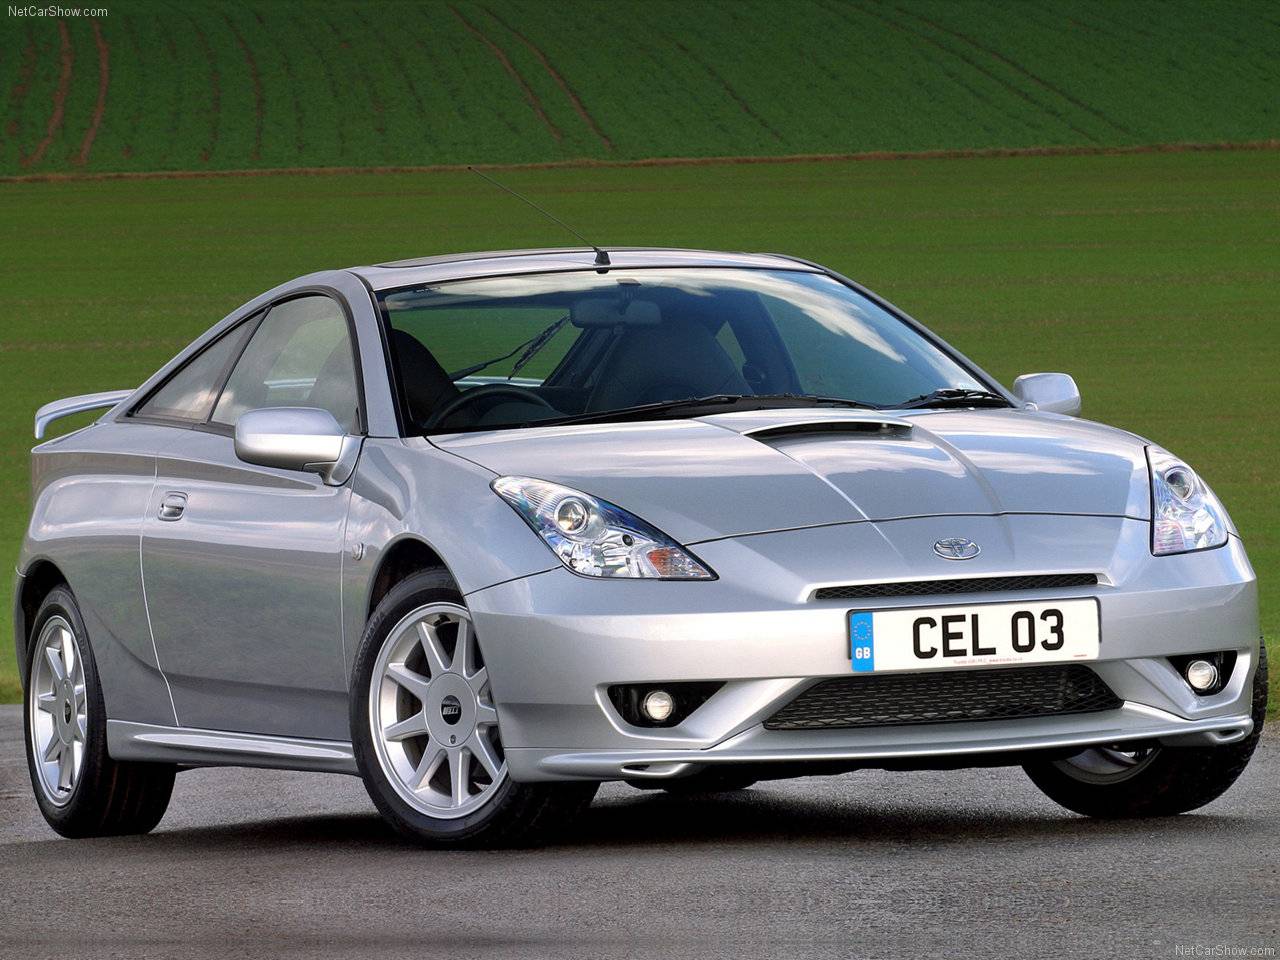 Toyota Celica Wallpaper 25812 Hd Wallpapers in Cars   Imagescicom